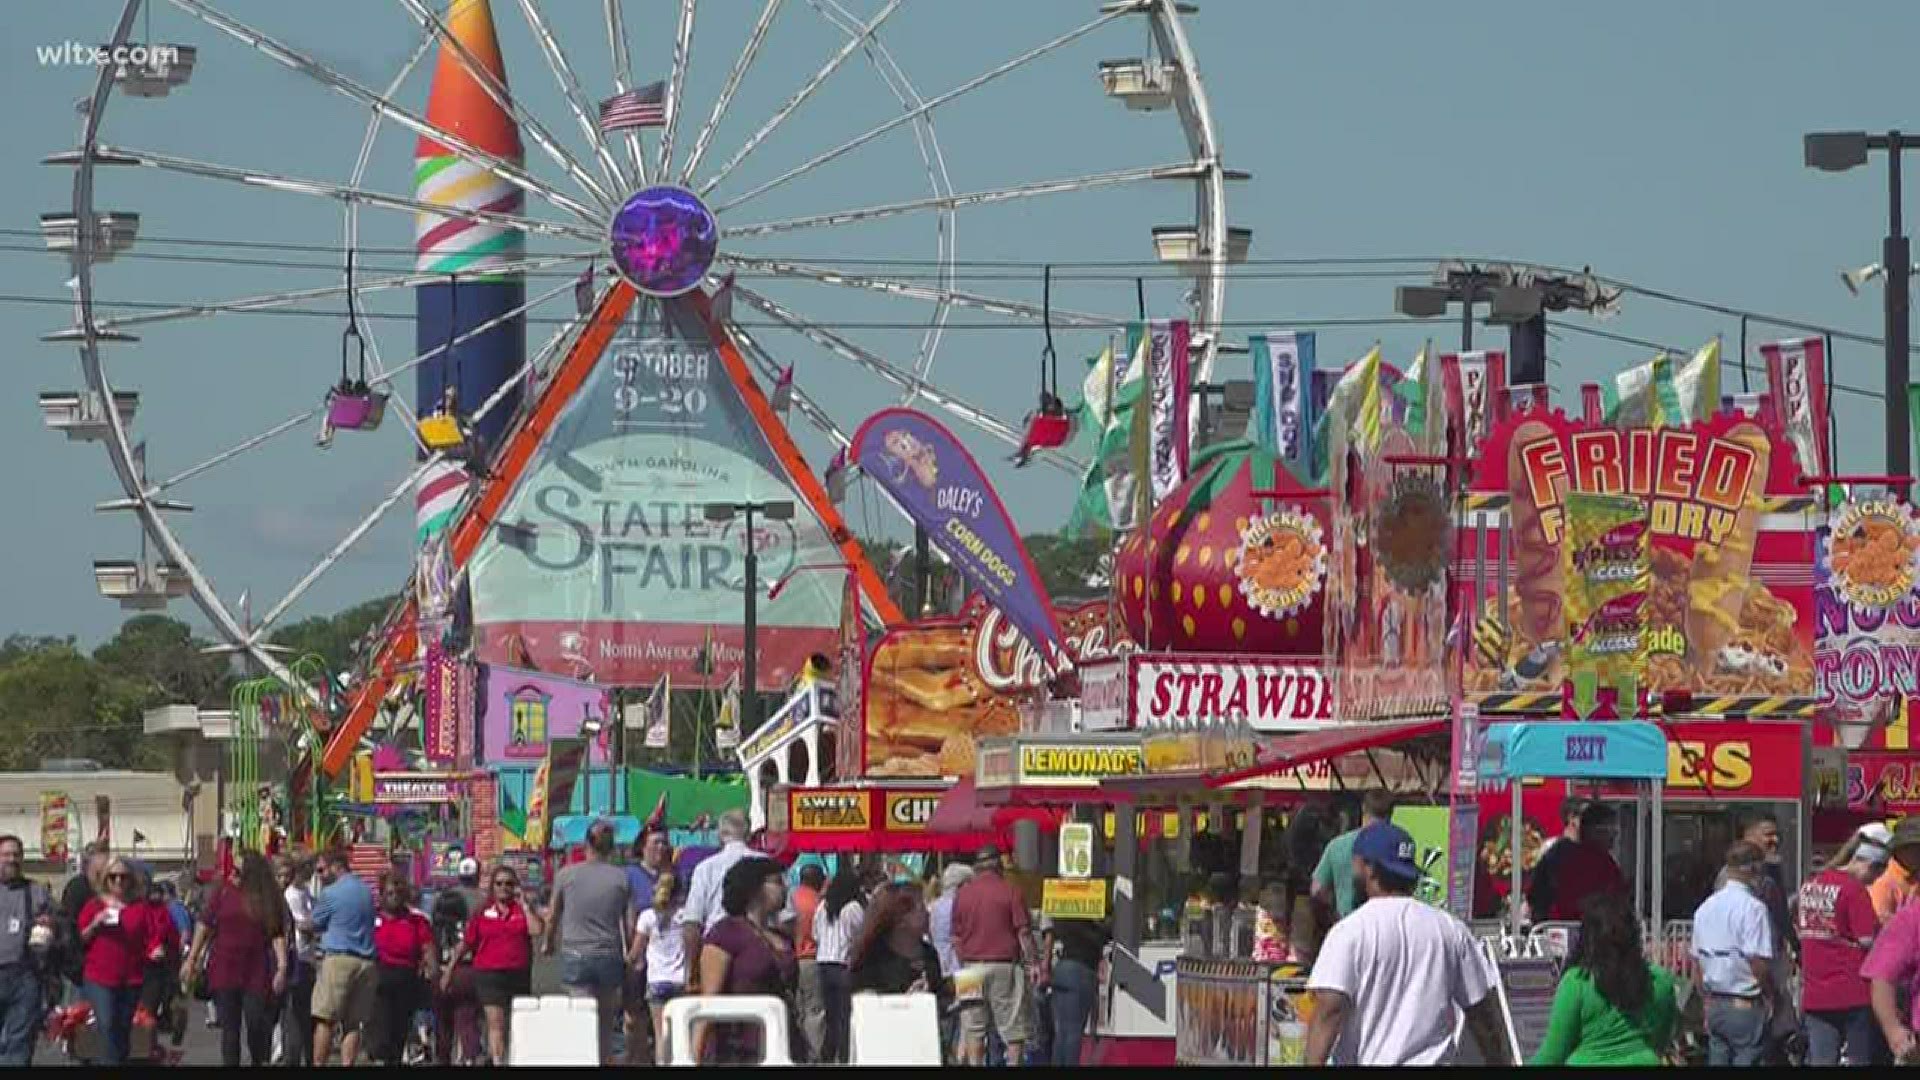 The South Carolina State Fair is set to take place October 14 – 25.